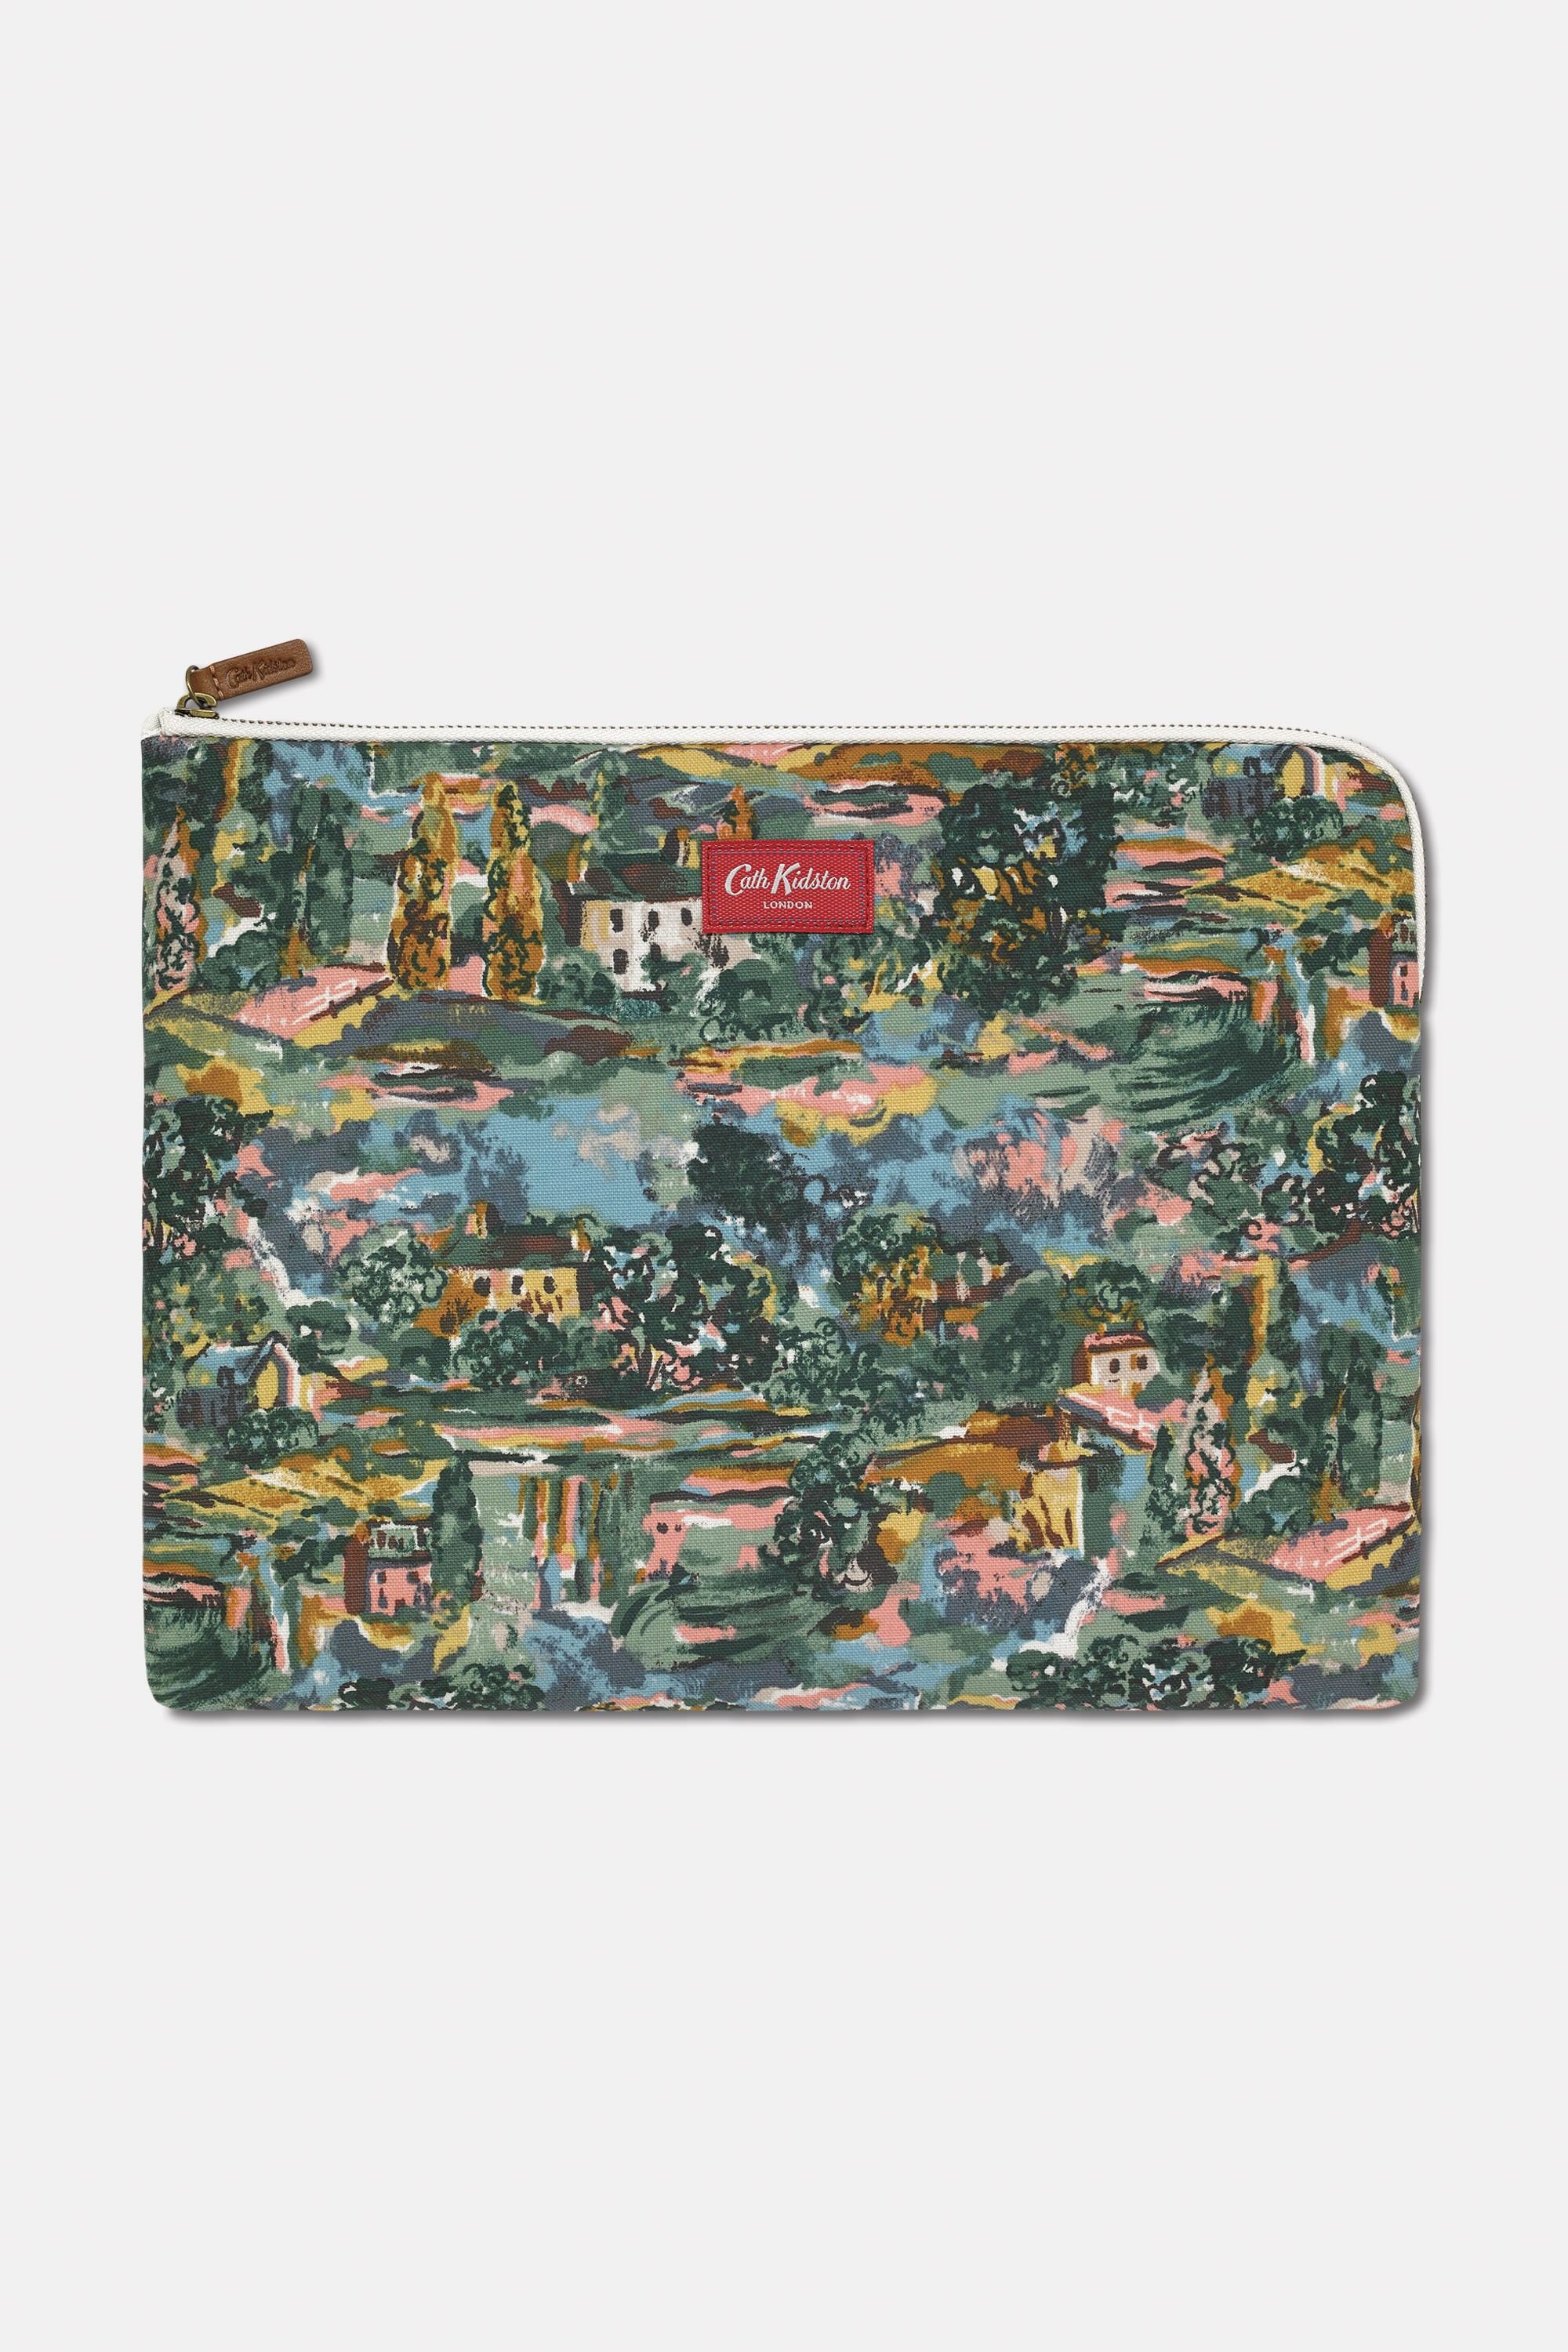 Cath Kidston Laptop Sleeve - Artists View 848831 - 13 Inch